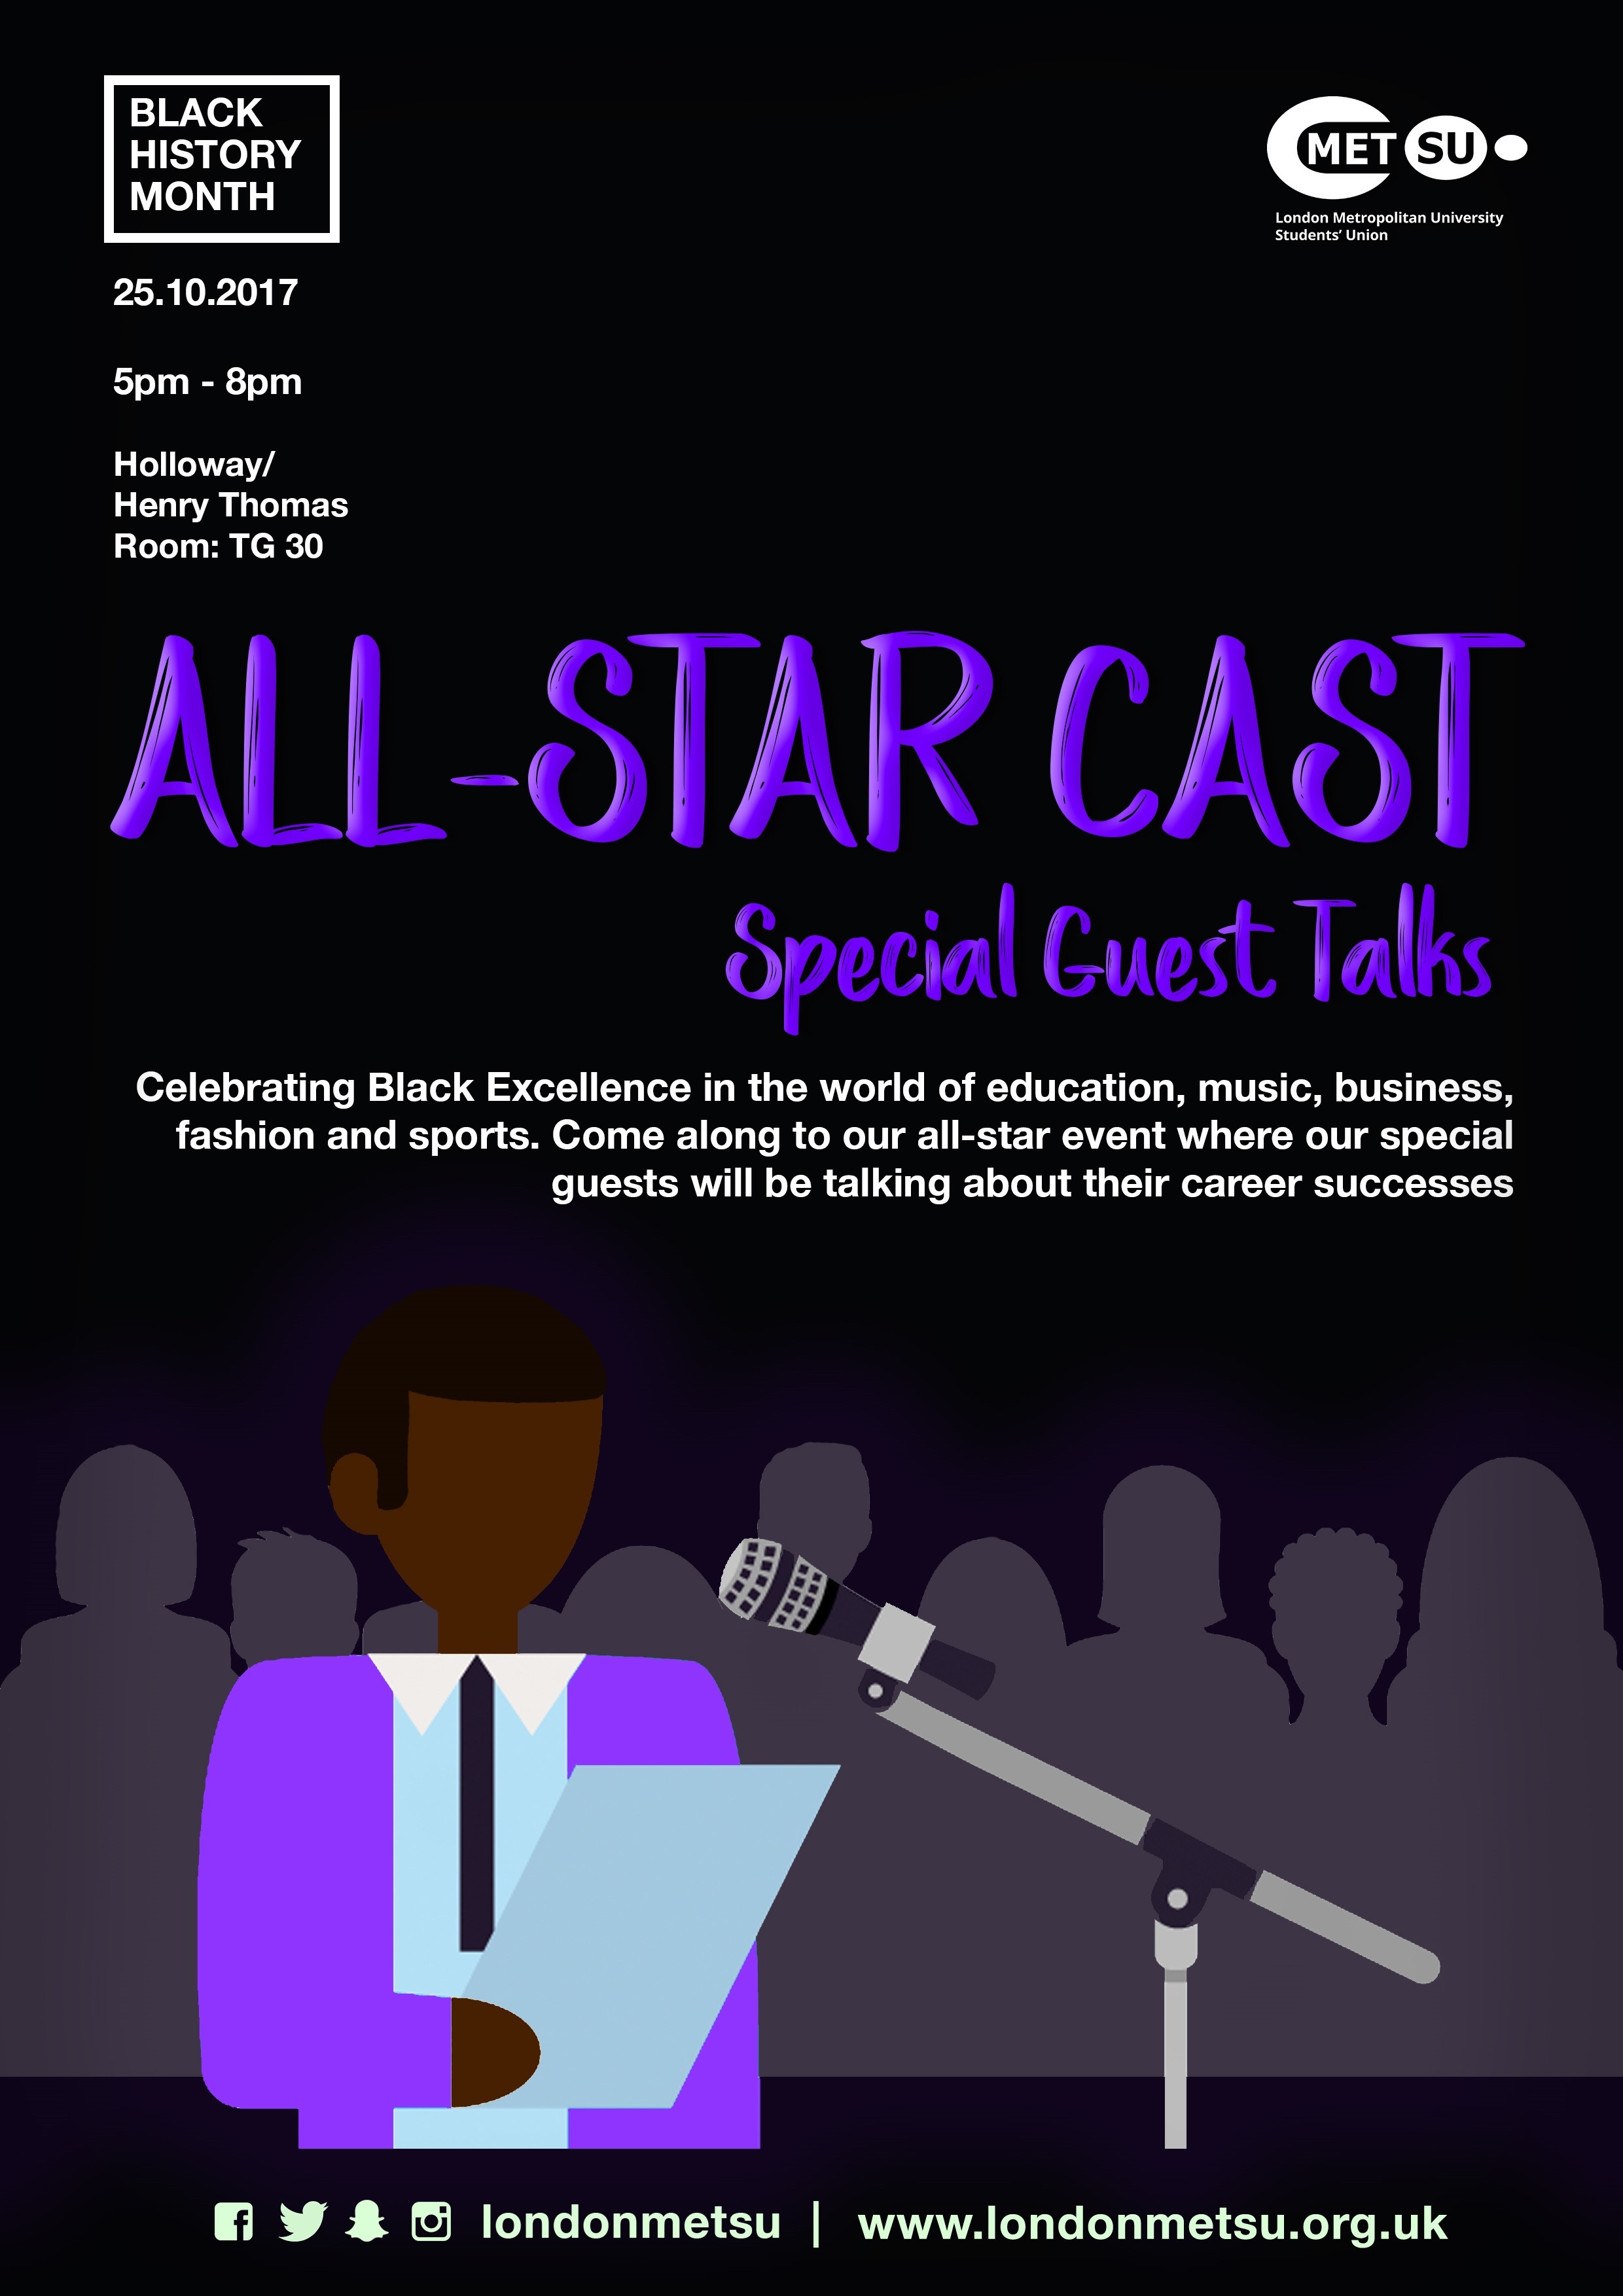 Celebrating Black Excellence in the best way that we know for Black History Month!  All Star Cast brings the brightest, prominent and successful figures within the Black British community that we find in the fields of sports, politics, music, business and more!  Guest speakers will be sharing their success stories in their careers